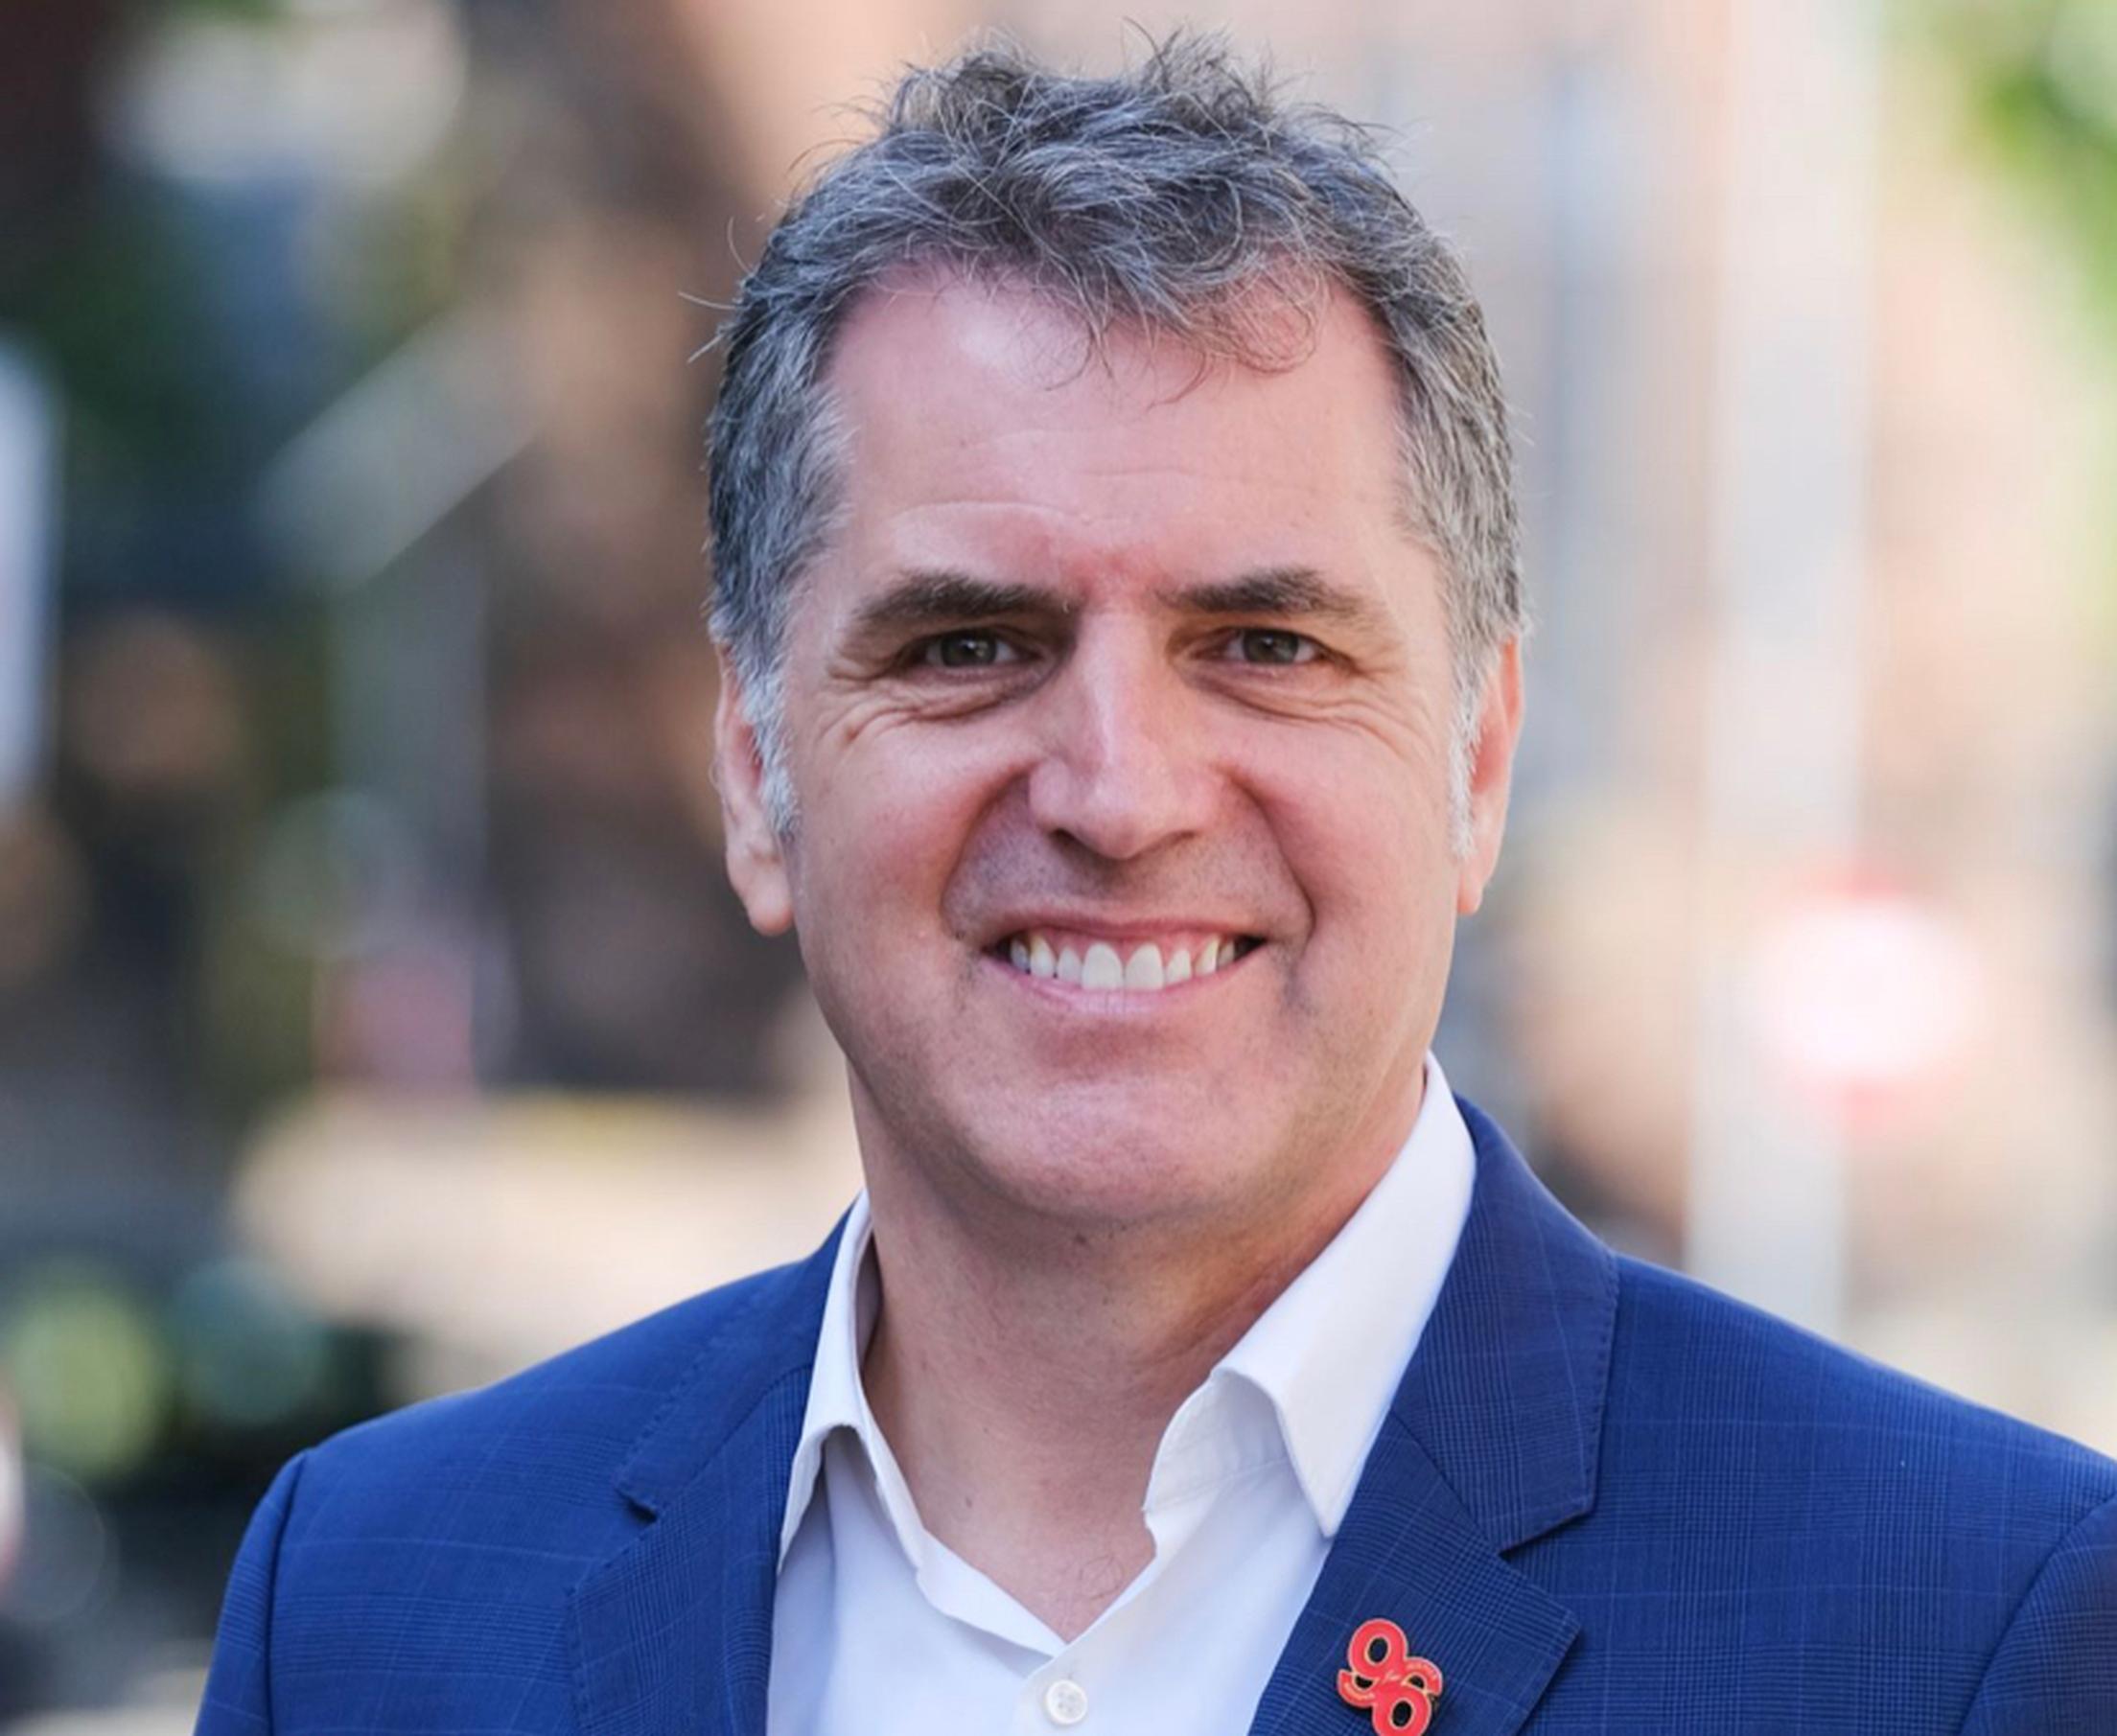 Steve Rotheram: Using the powers that devolution has given to us, I want to build a London-style integrated transport system that’s faster, cheaper, cleaner and more reliable